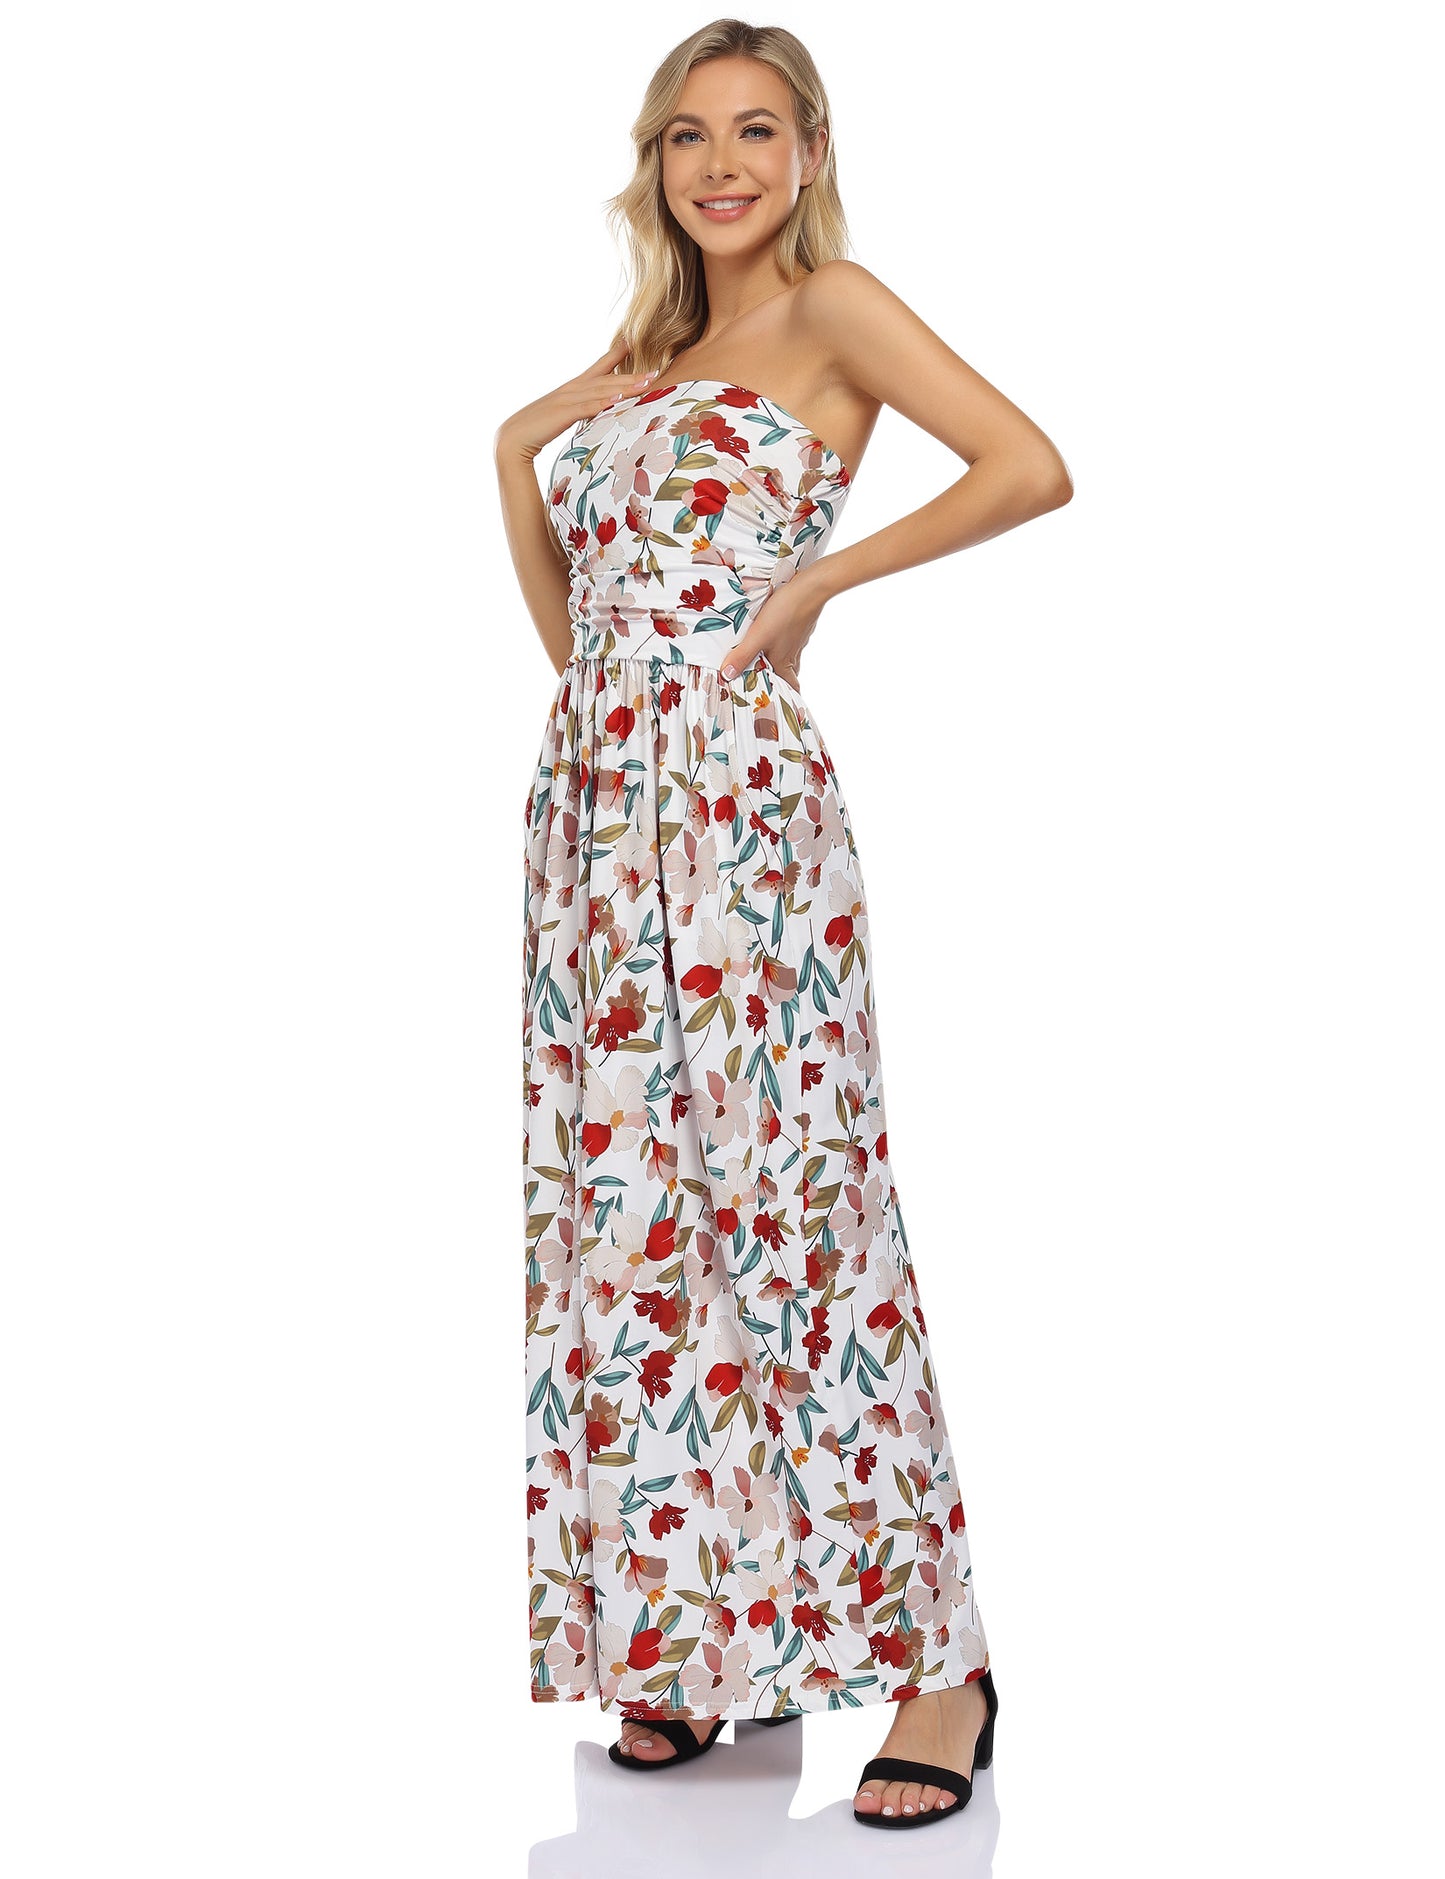 YESFASHION Women's Strapless Graceful Floral Party Maxi Long Dress Flower White